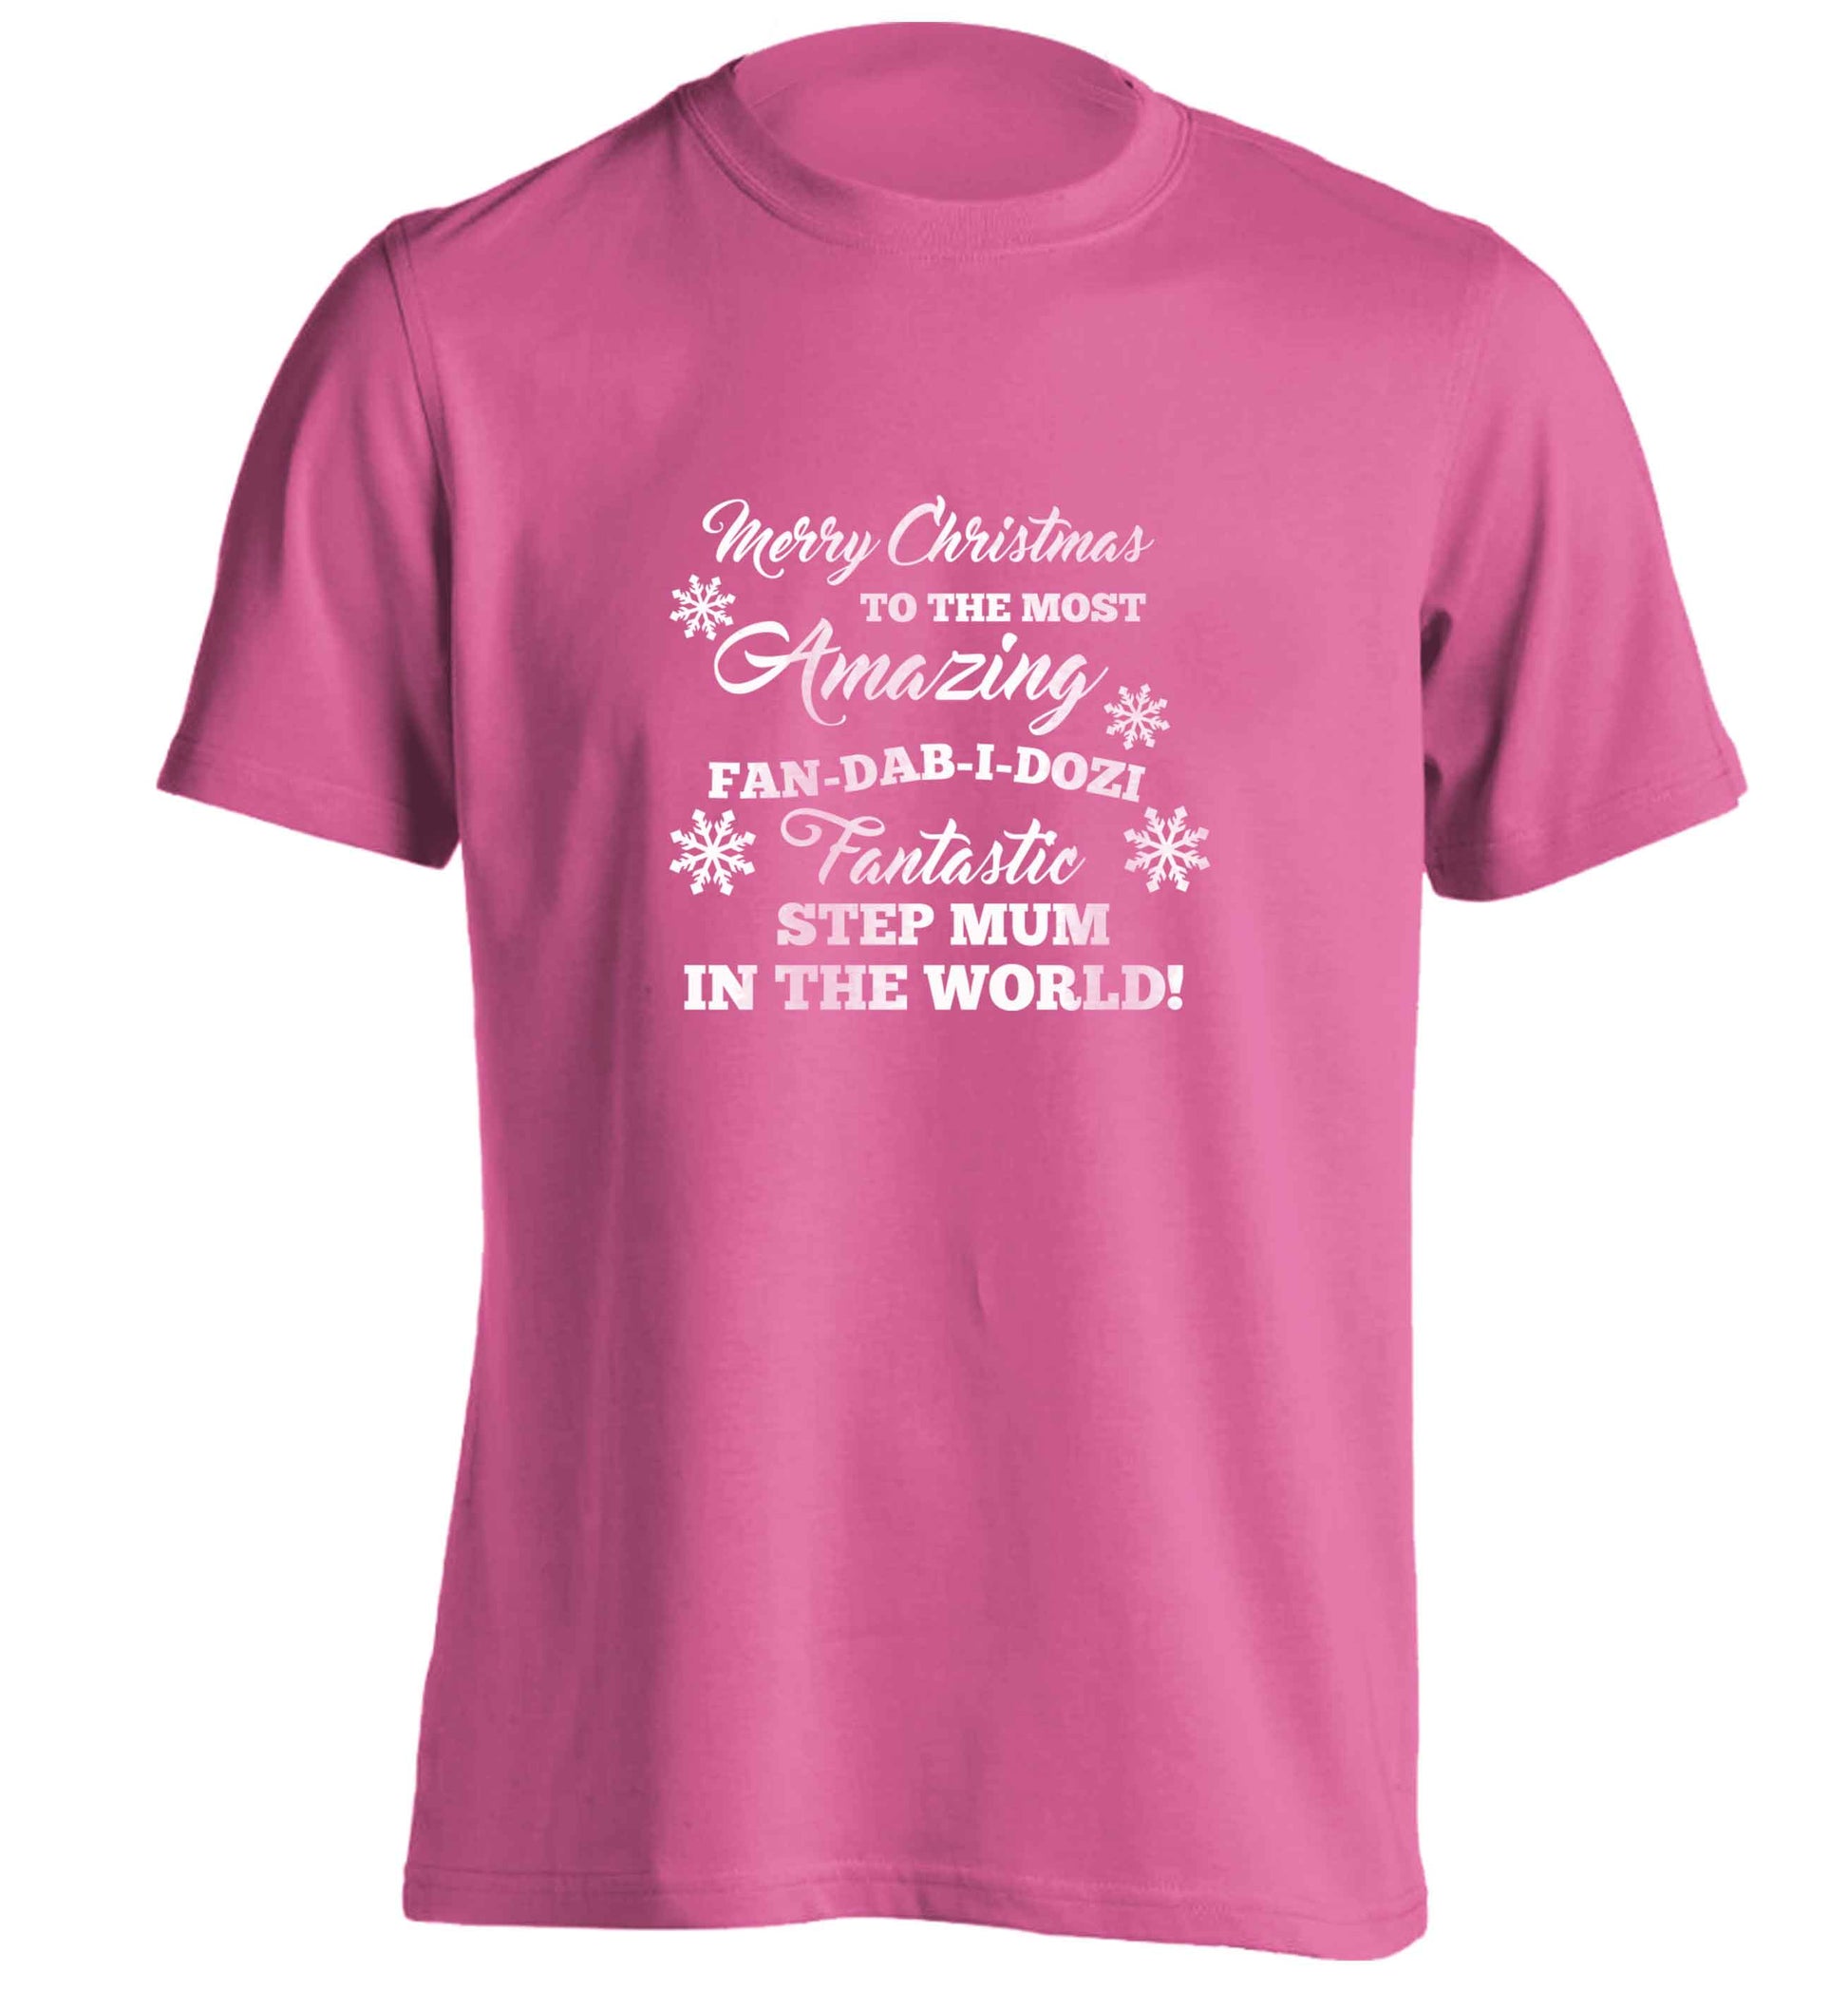 Merry Christmas to the most amazing fan-dab-i-dozi fantasic Step Mum in the world adults unisex pink Tshirt 2XL